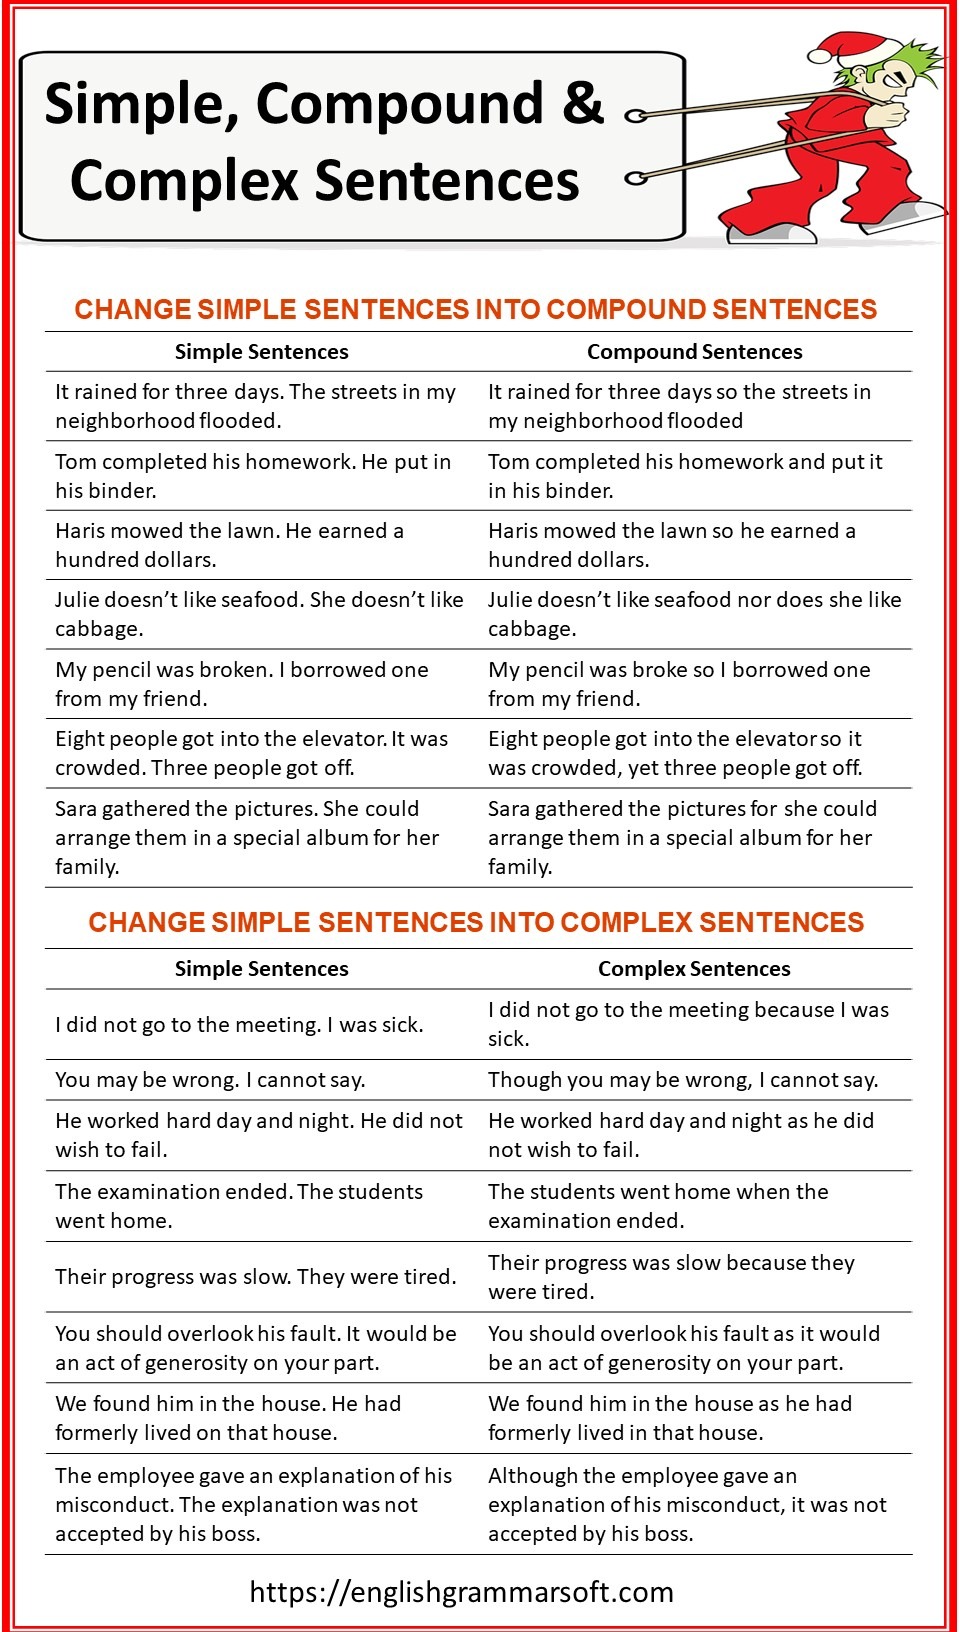 Simple Compound And Complex Sentences Explained With Examples EnglishGrammarSoft